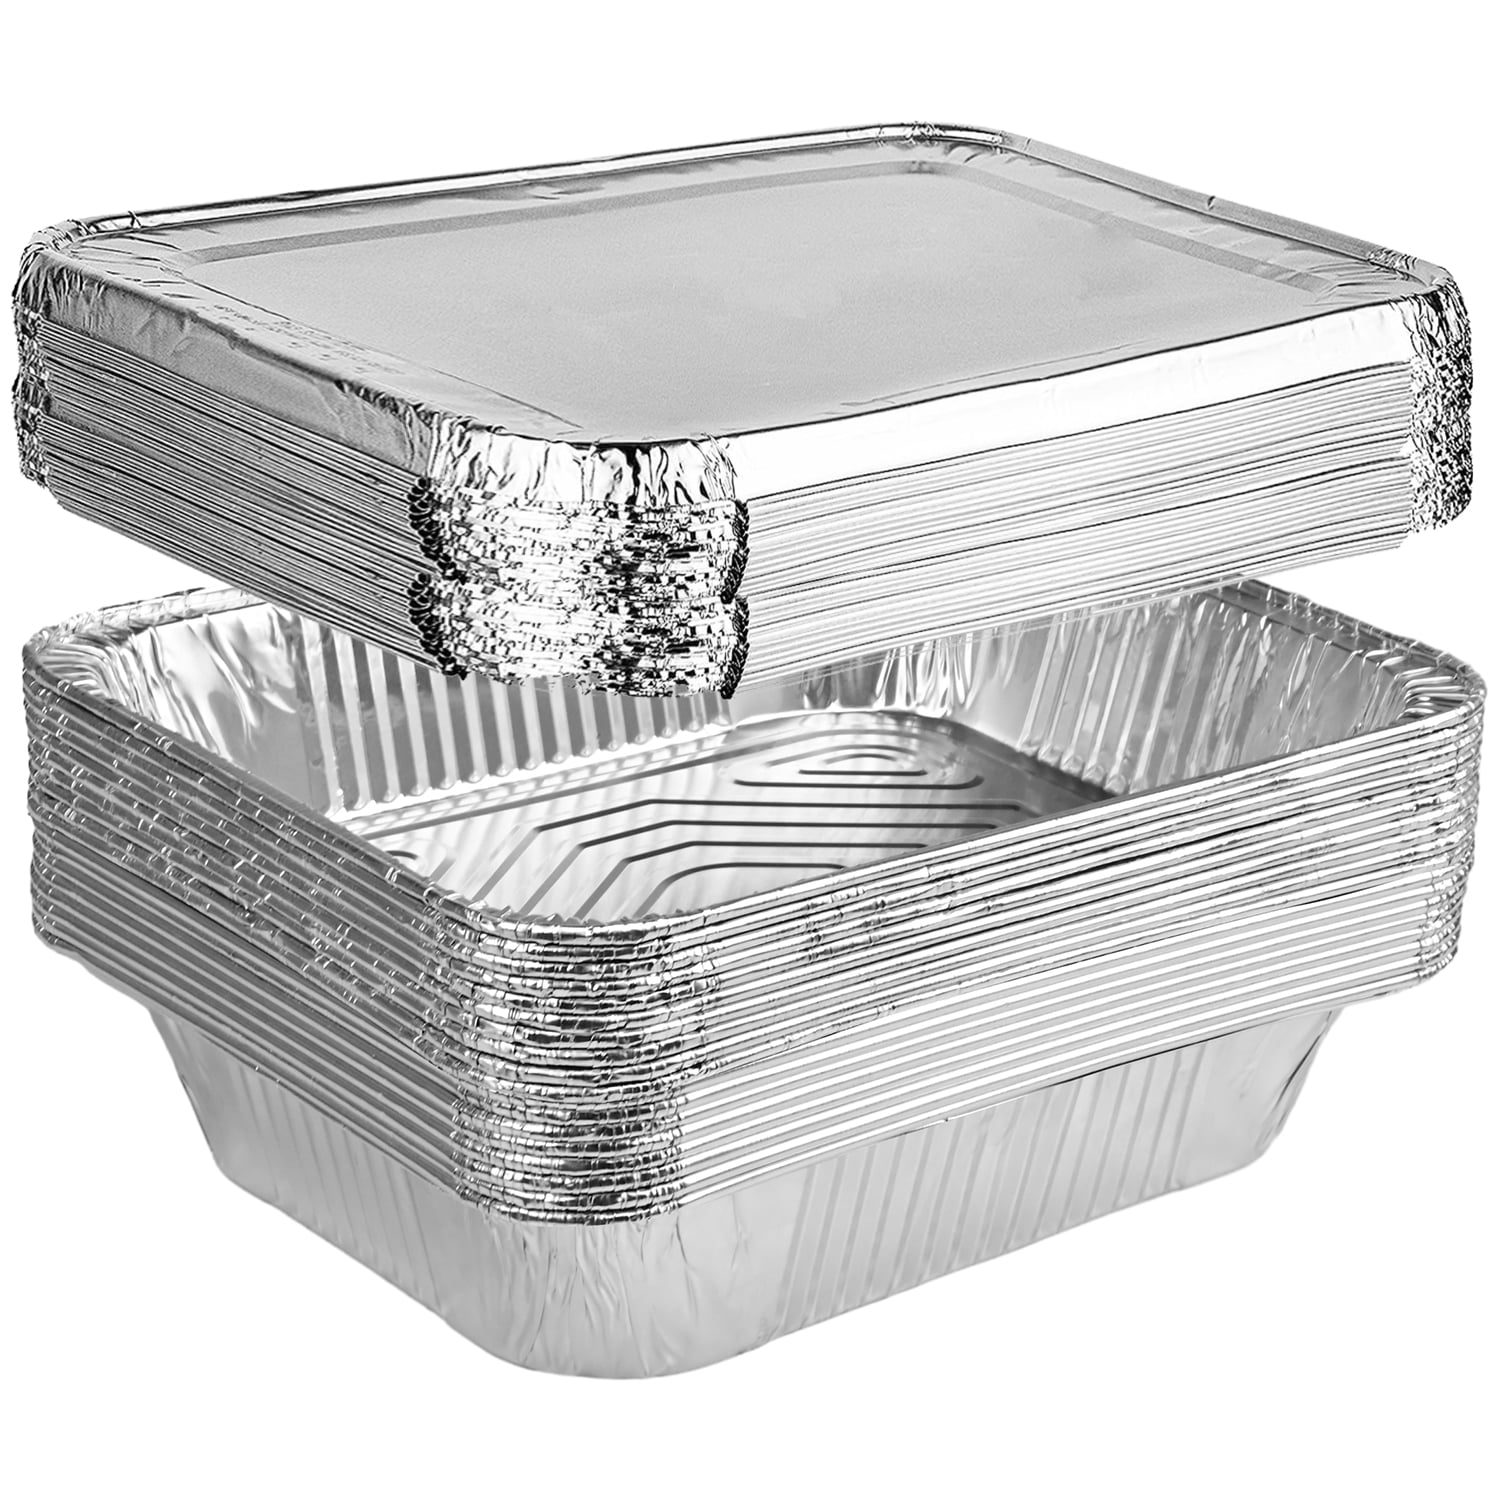 Casewin Aluminum Foil Pans(50 Pack) -12*8 in Tin Foil Pans with High Heat  Conductivity - Disposable Cookware For Baking, Grilling, Cooking, Storing